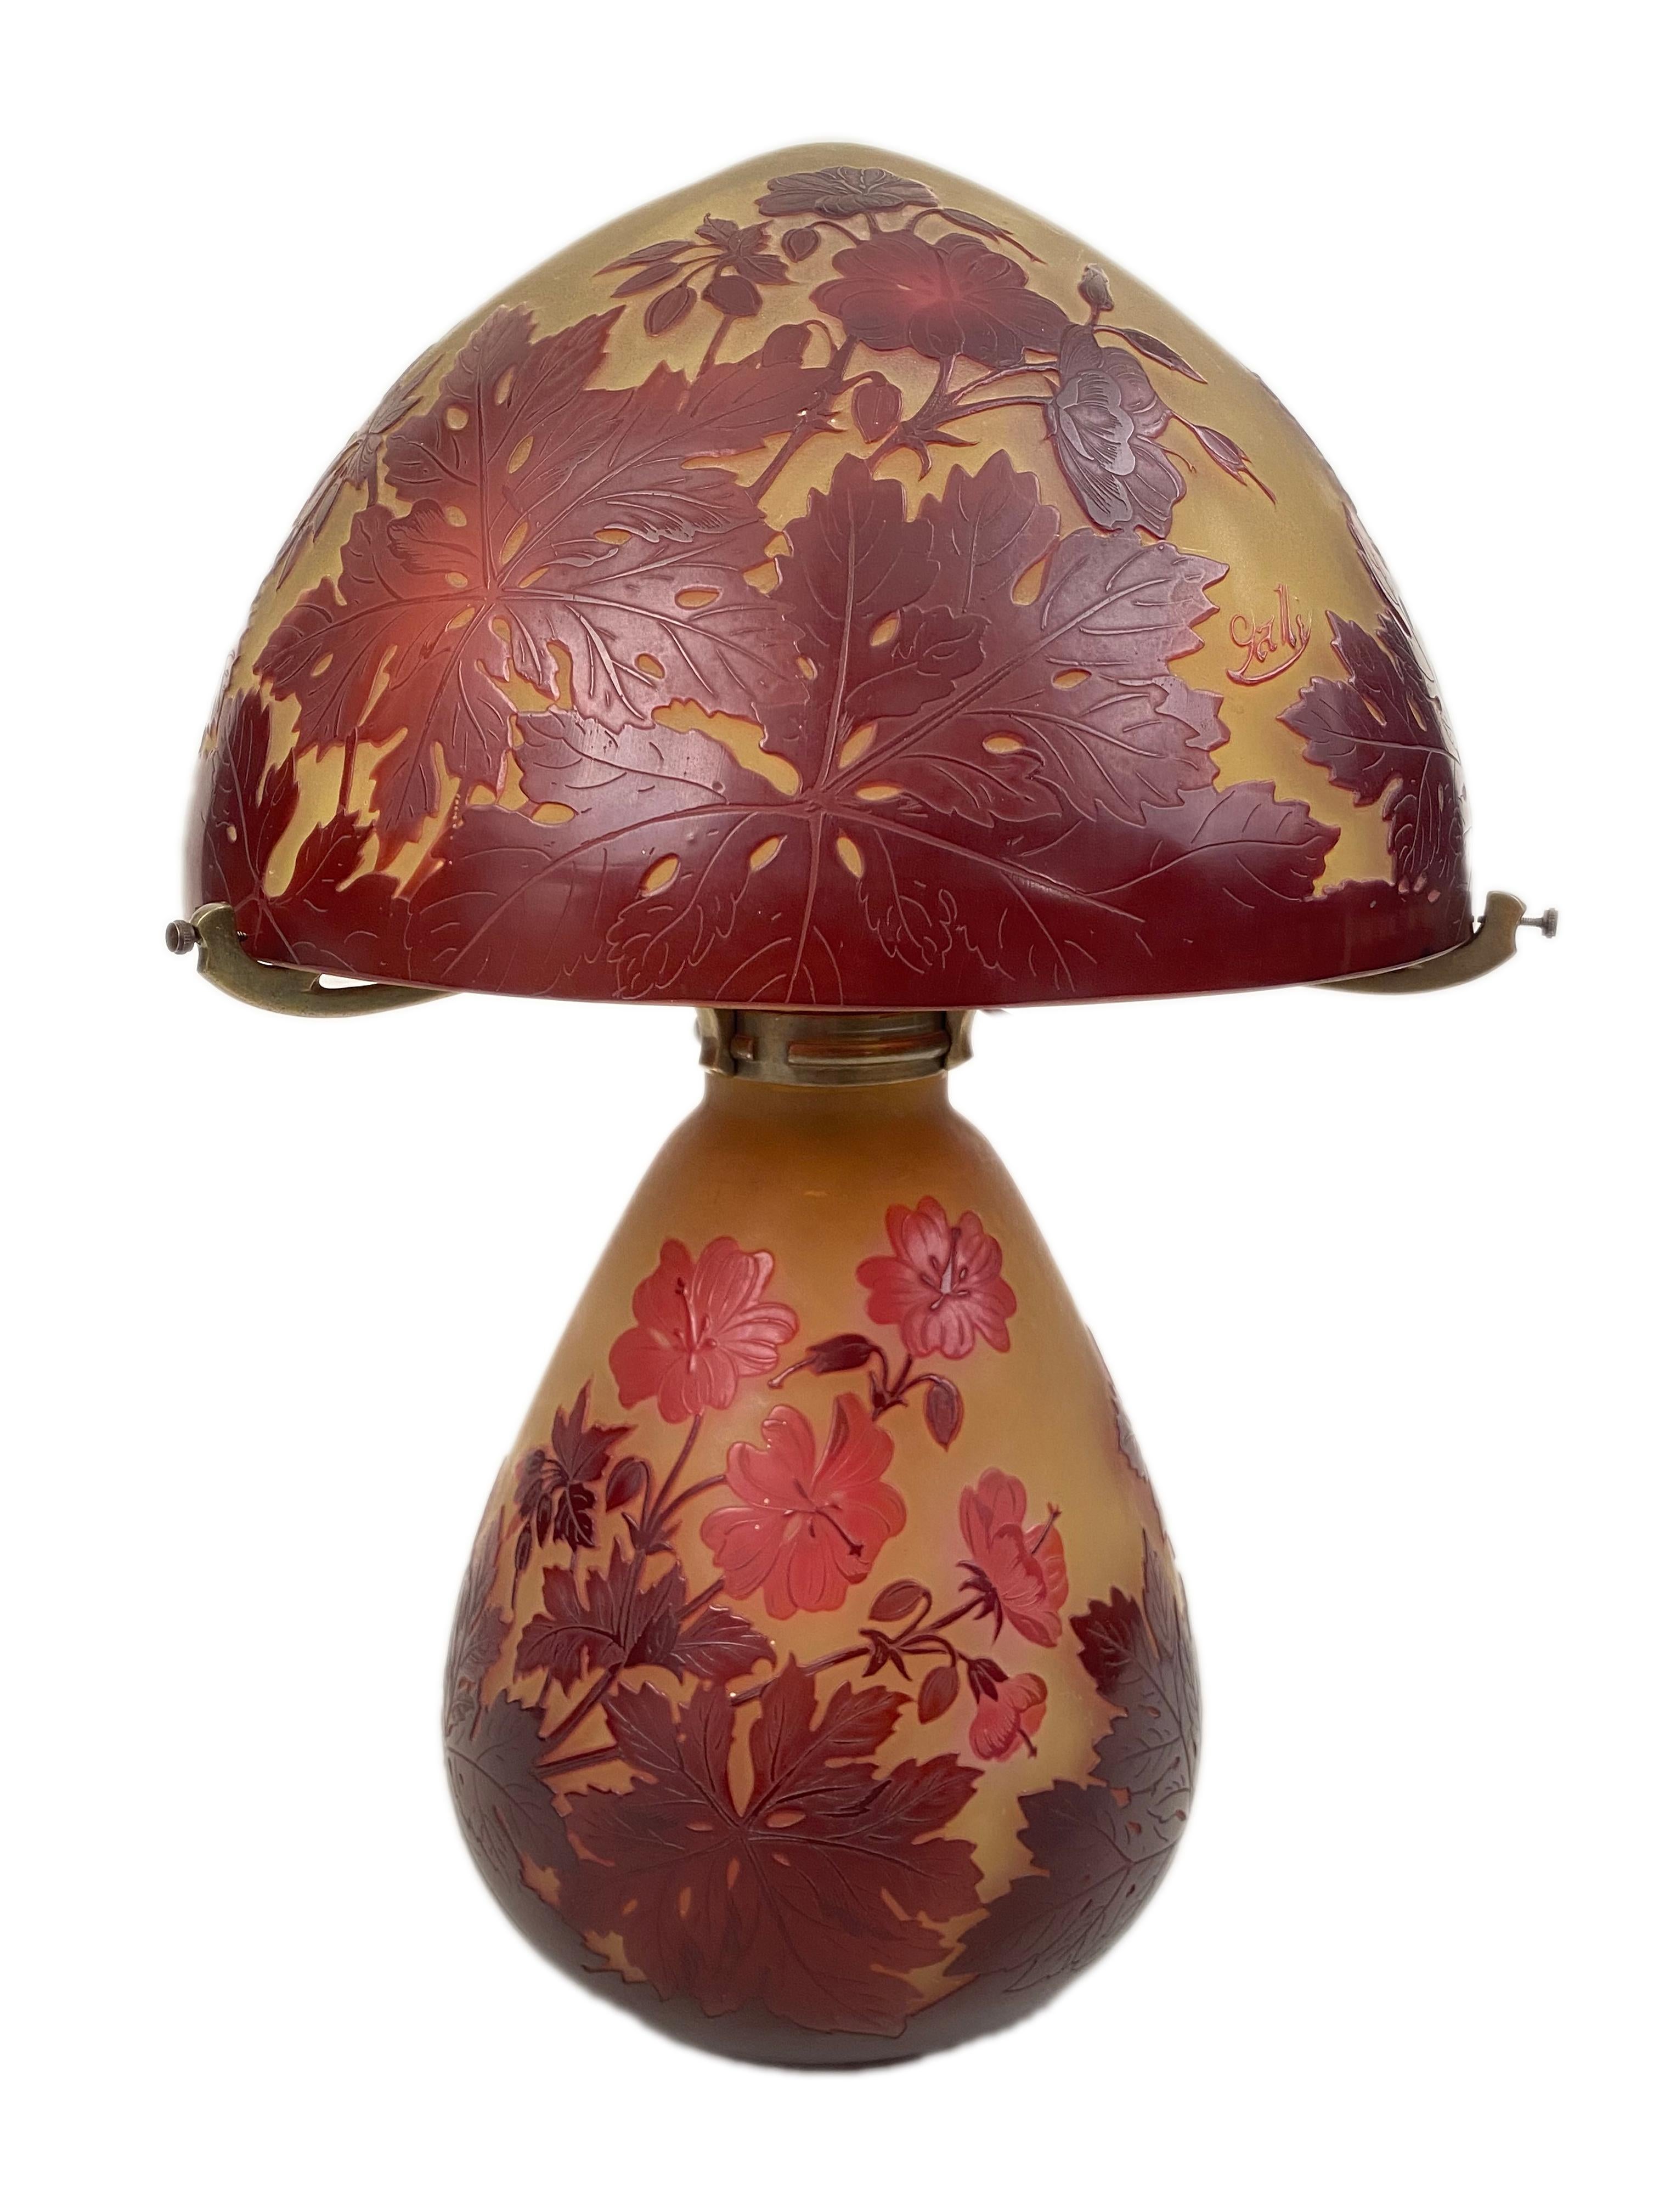 An early 20th century French Art Nouveau cameo and bronze glass table lamp by, Emile Gallé with both base and shade decorated with all over vibrant, crimson red flower, leaf and stem decoration against a yellow - white background. Both the base and